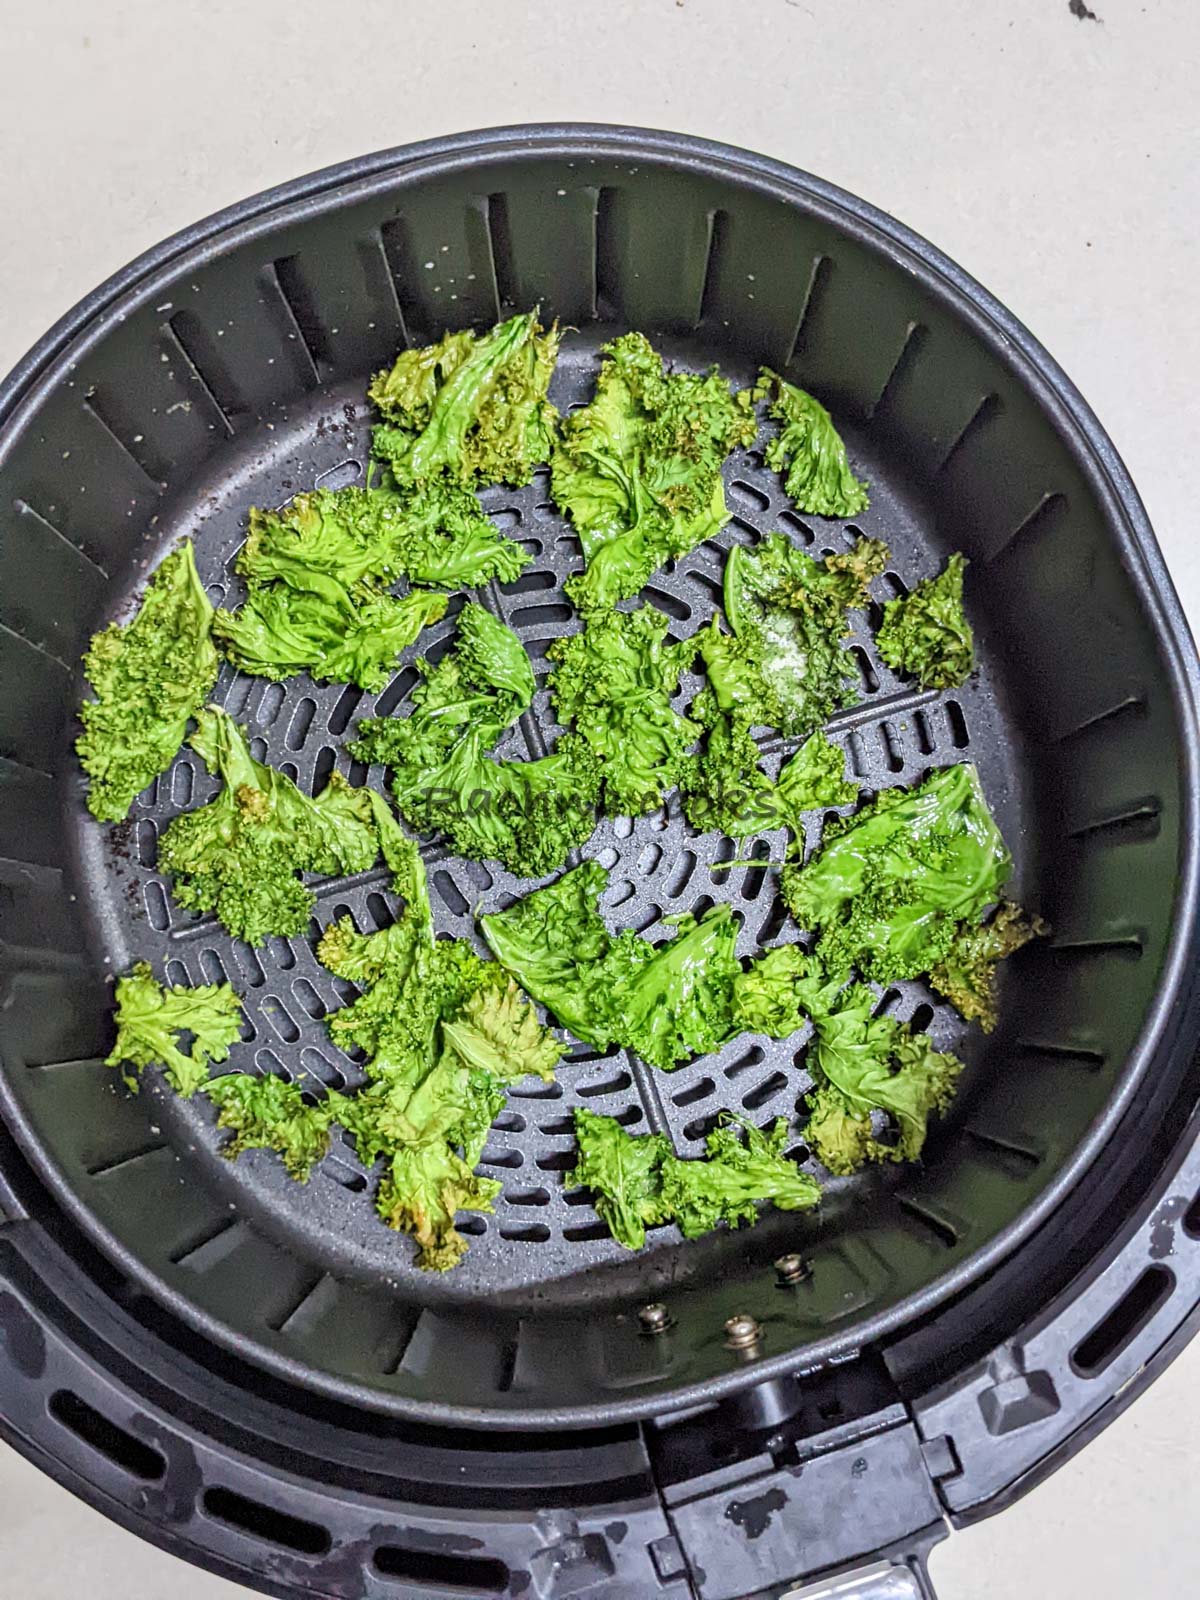 Kale chips done after air frying in air fryer basket.